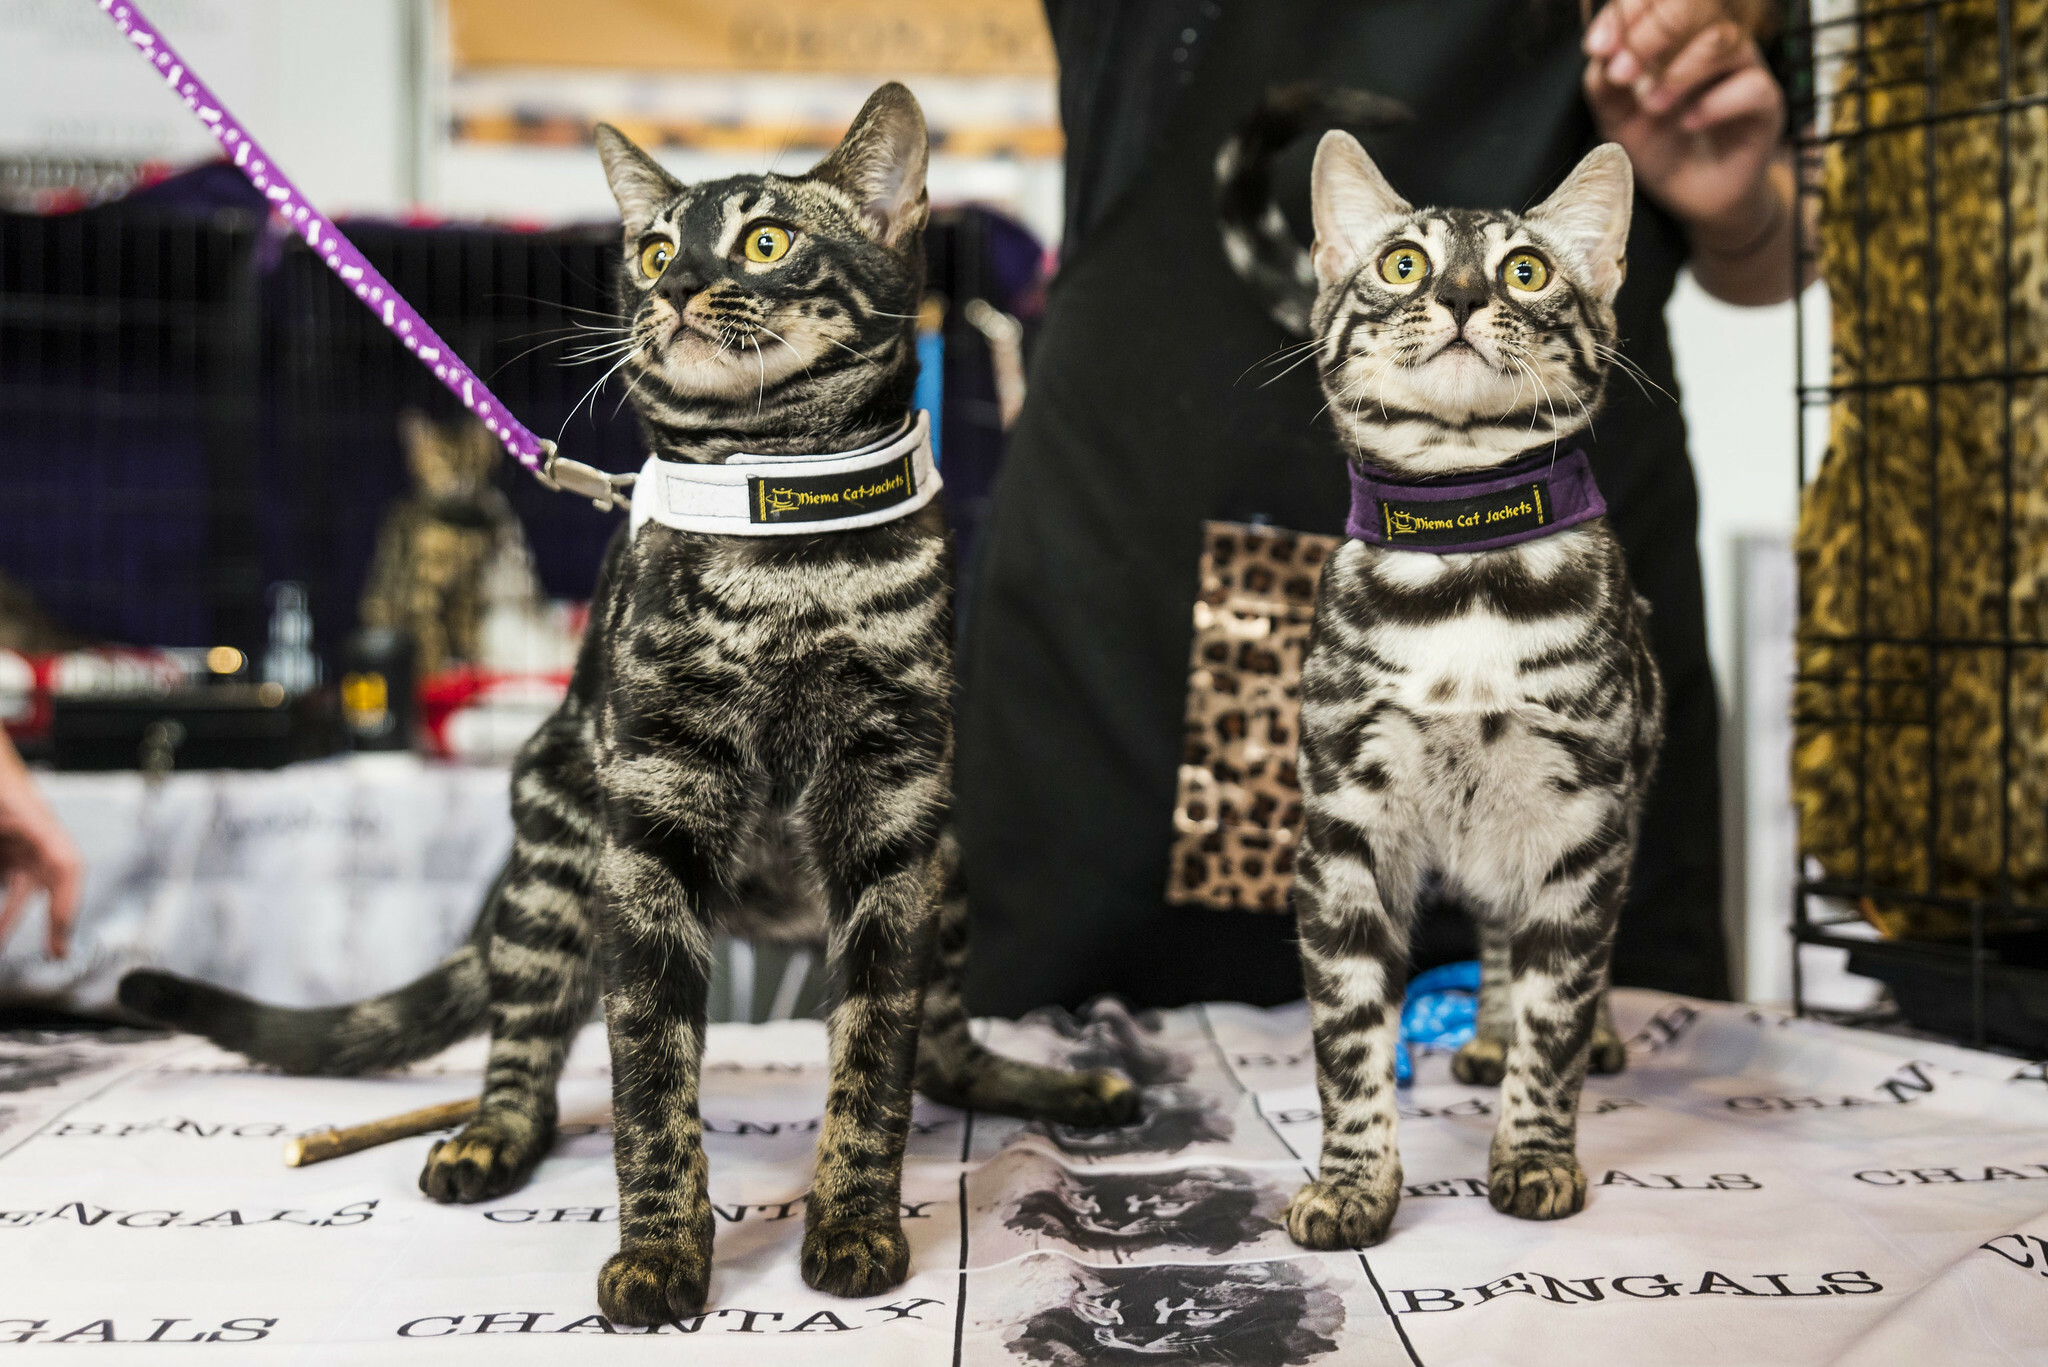 Cat Lovers Show returns to Melbourne